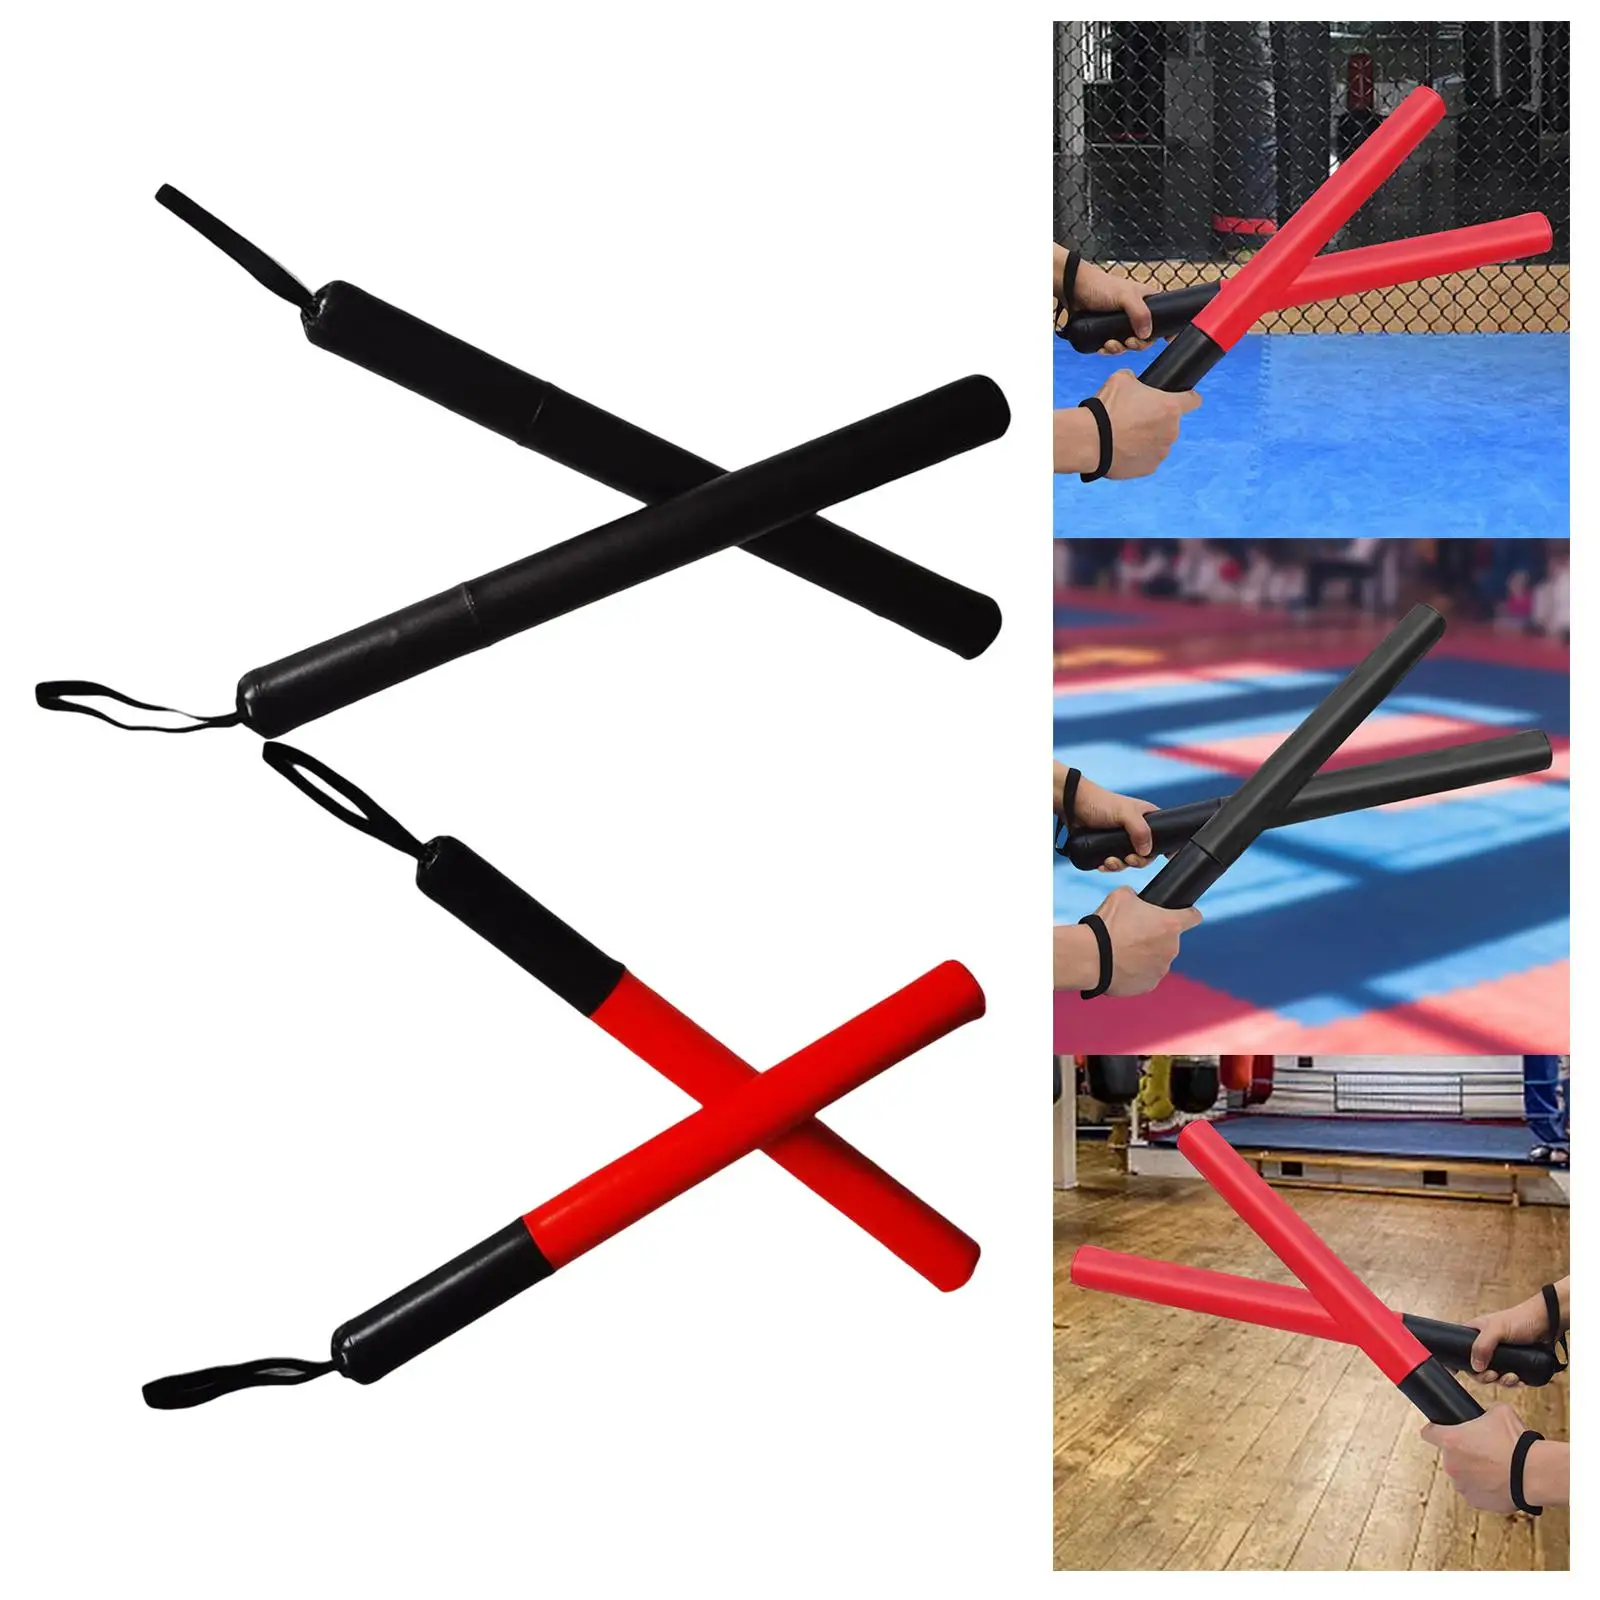 2Pcs Boxing Training Rods Boxing Training Equipment Target Boxing Punching Pads Tool PU Leather for Fighting Flexibility Speed